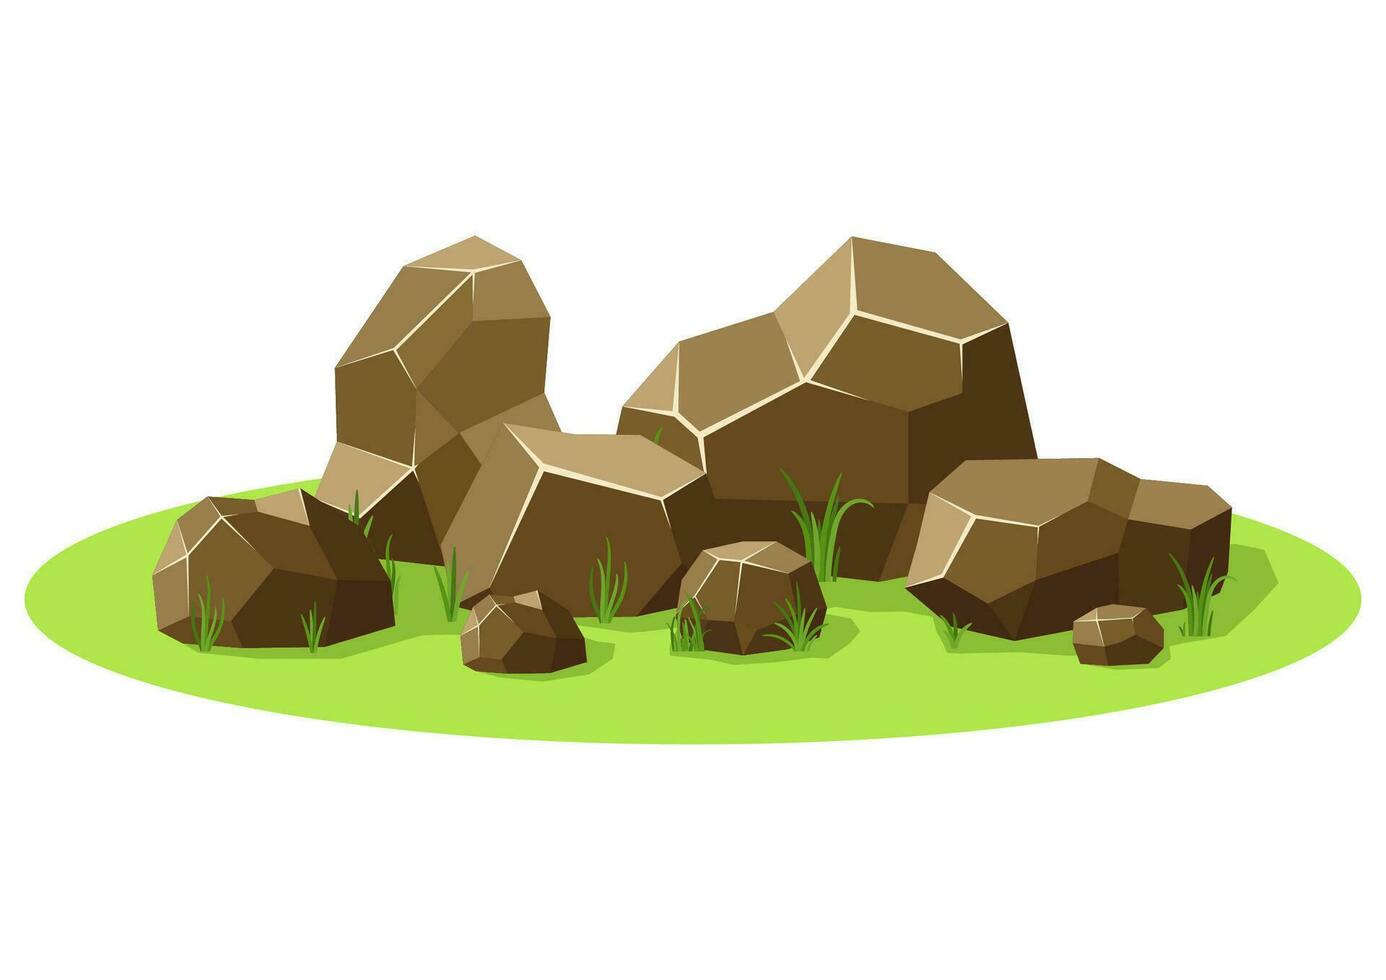 Rocks and stones piled on green grass. Stones and rocks in isometric 3d flat style. Set different shapes and sized boulders for background natural landscape and game. Vector illustration